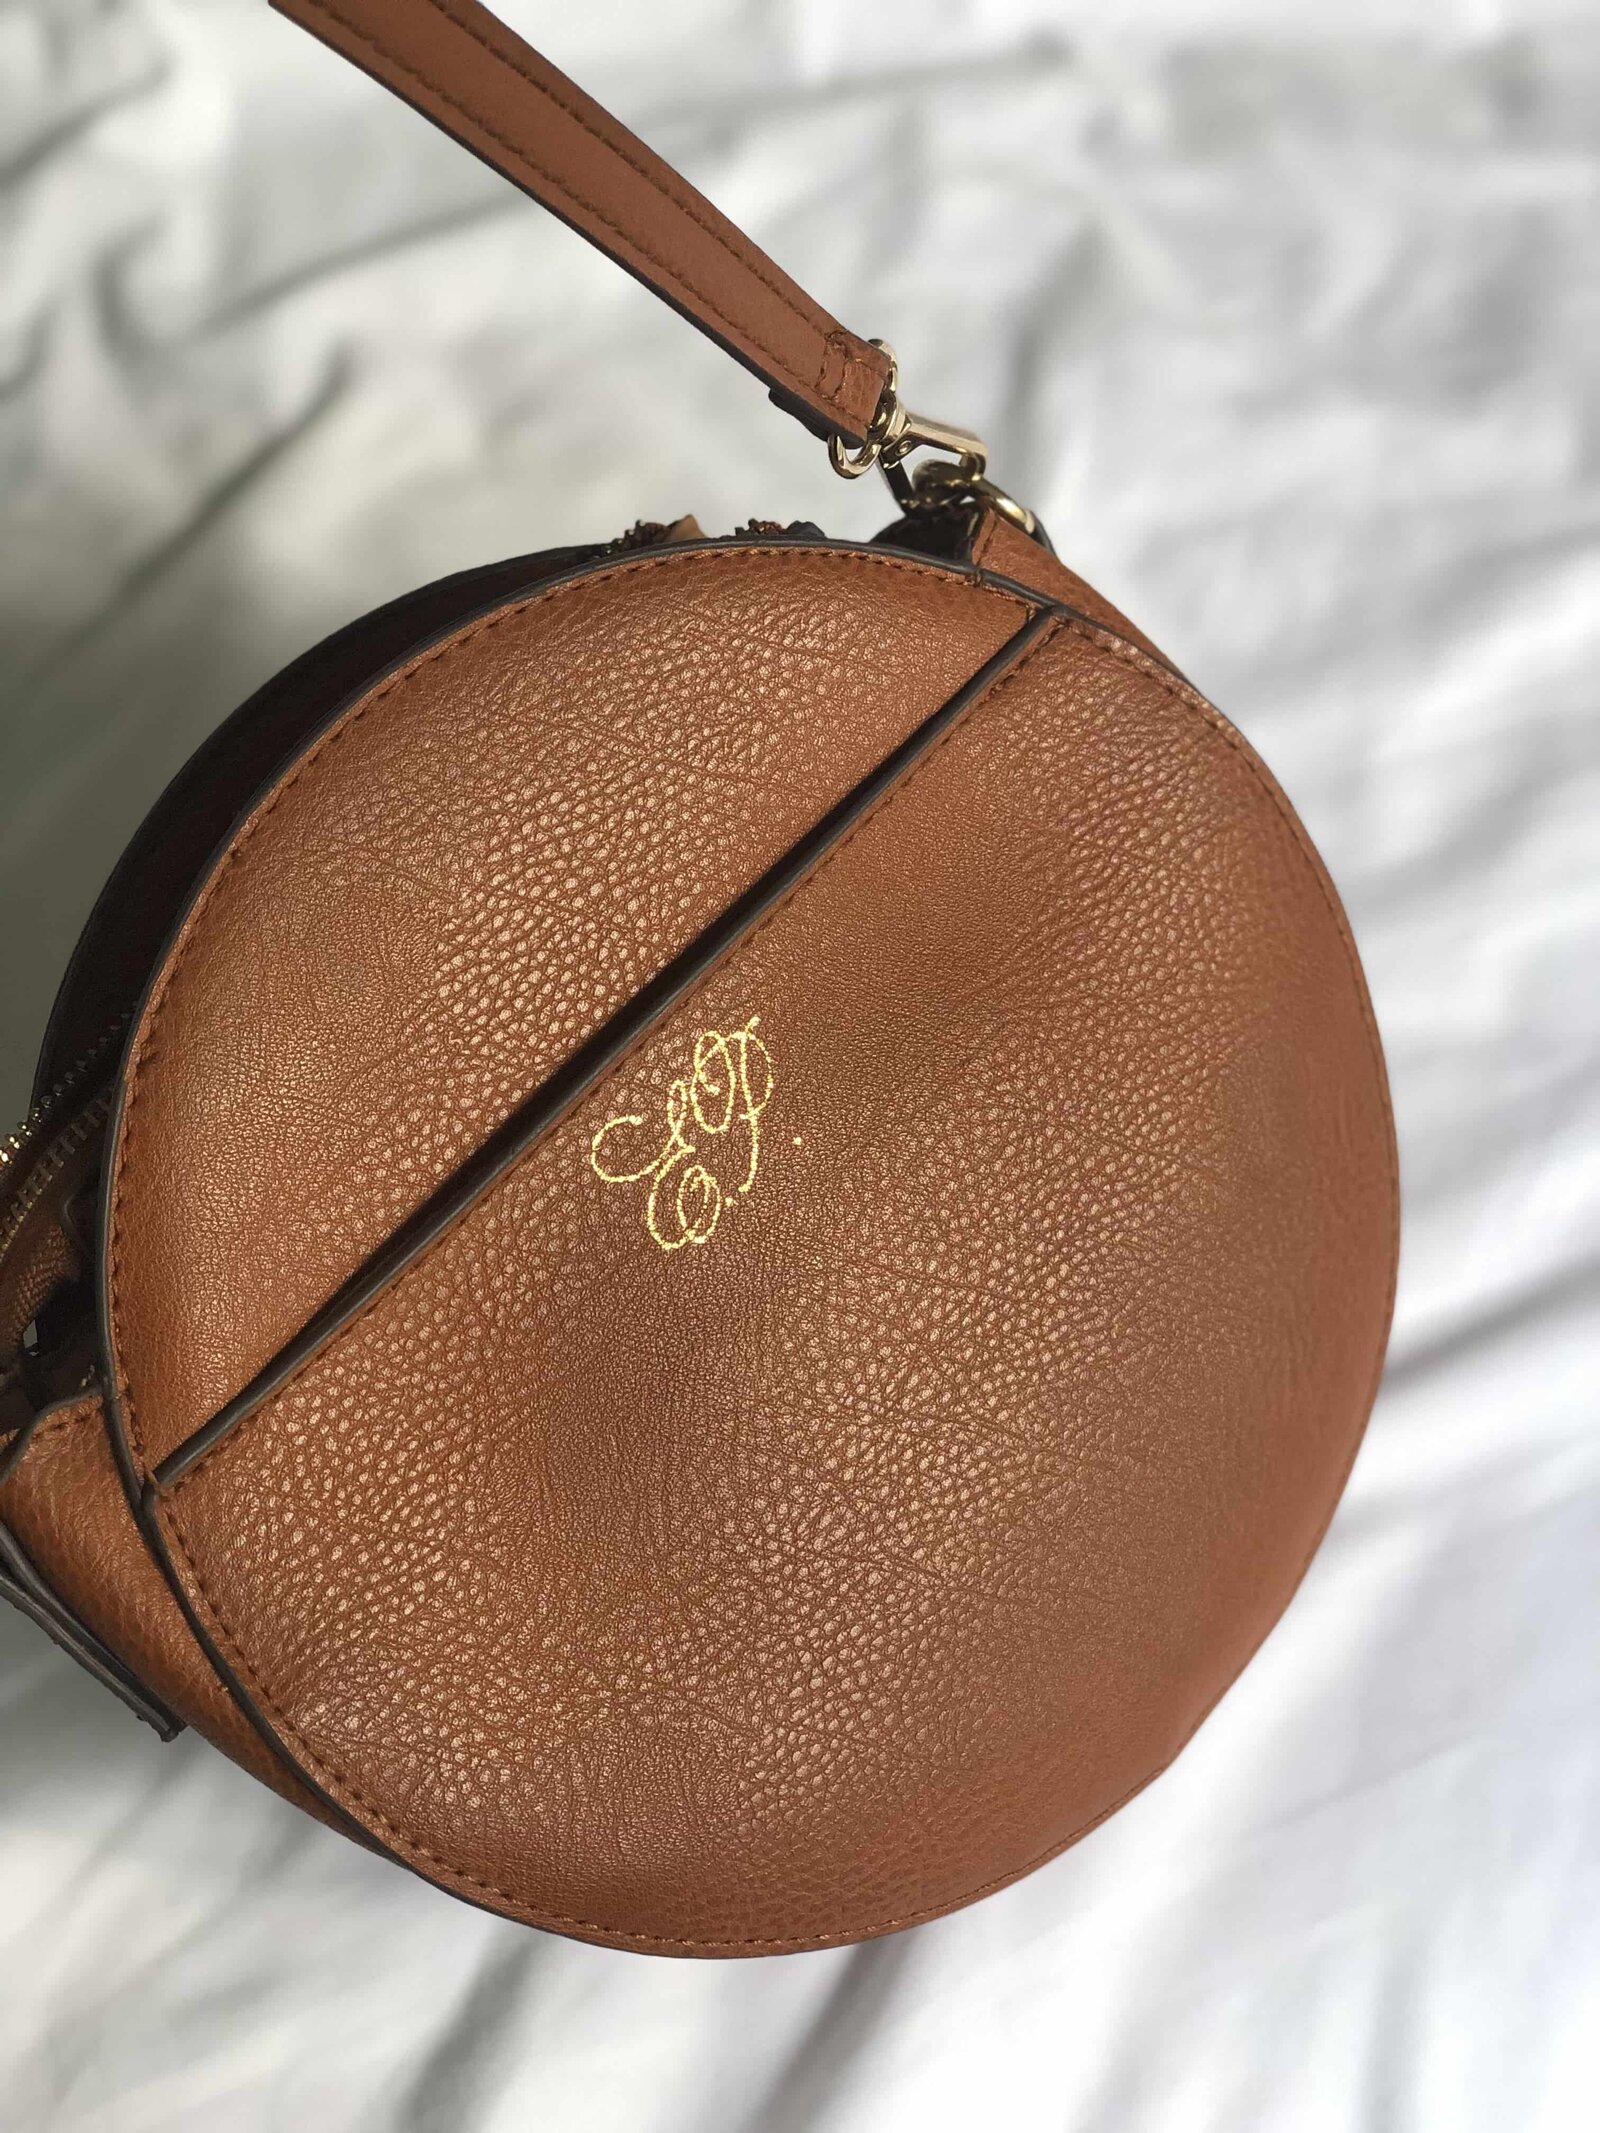 embossed leather purse with calligraphy initials